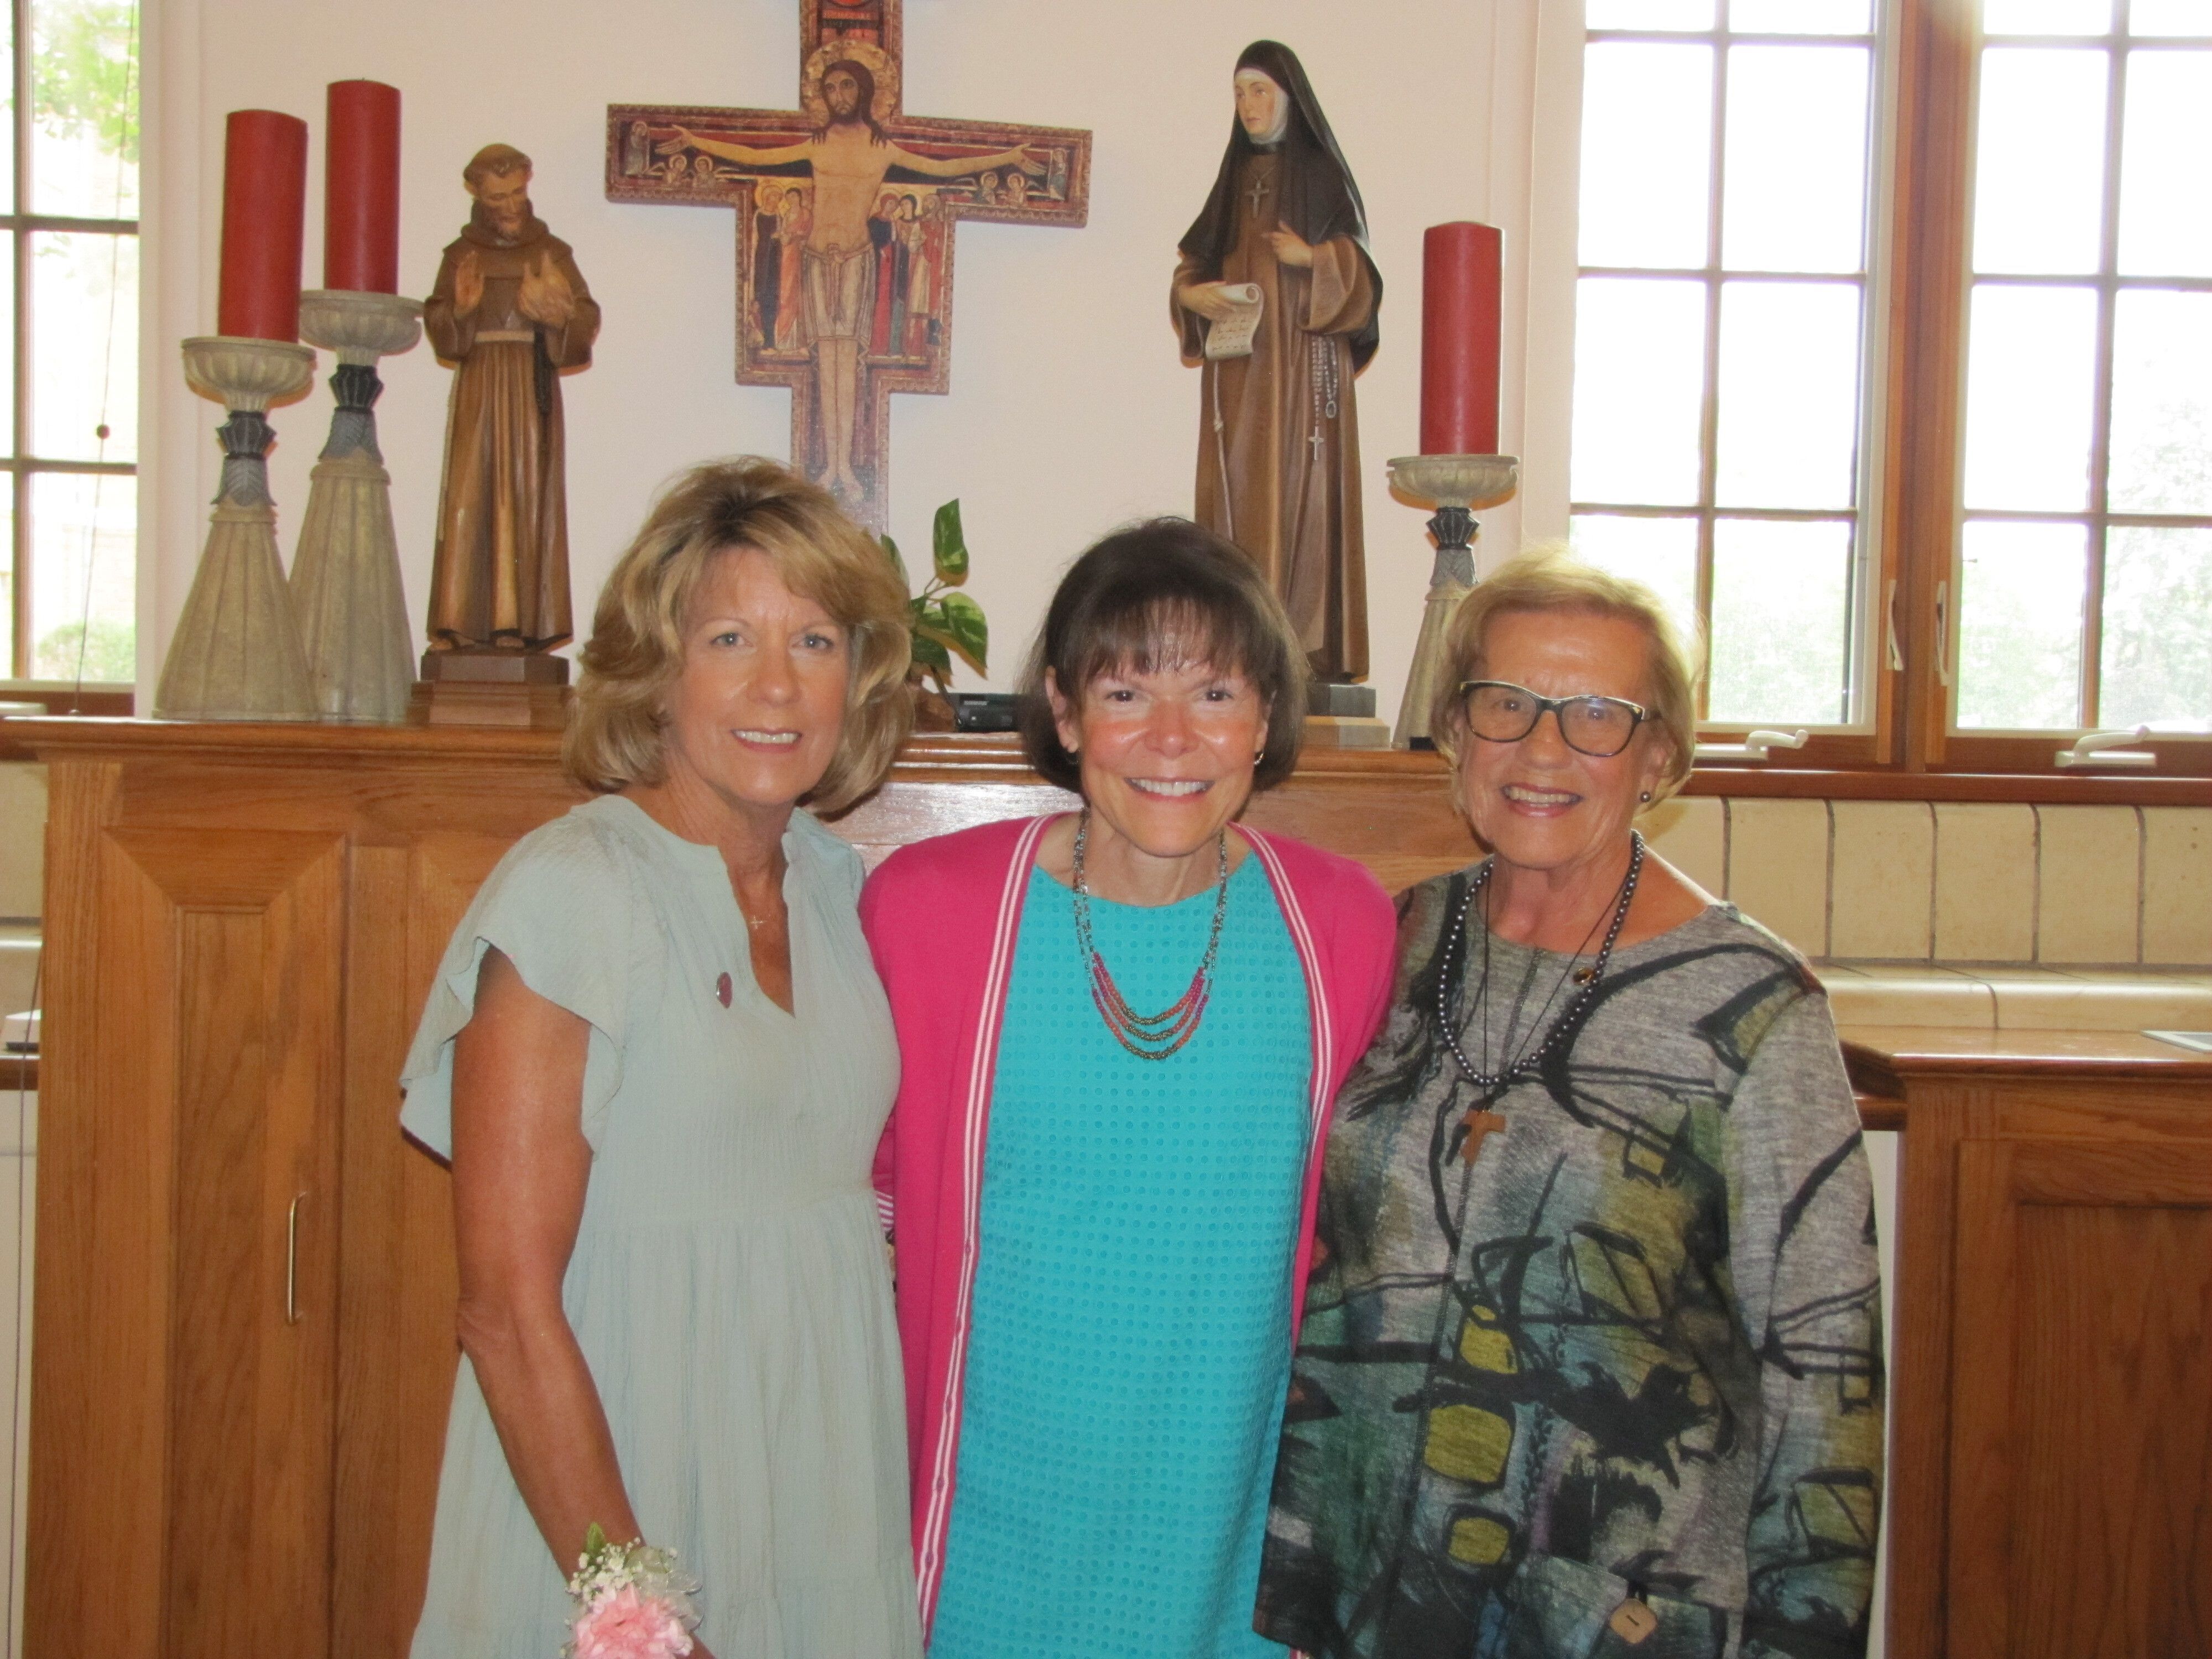 Three women smile together in church.